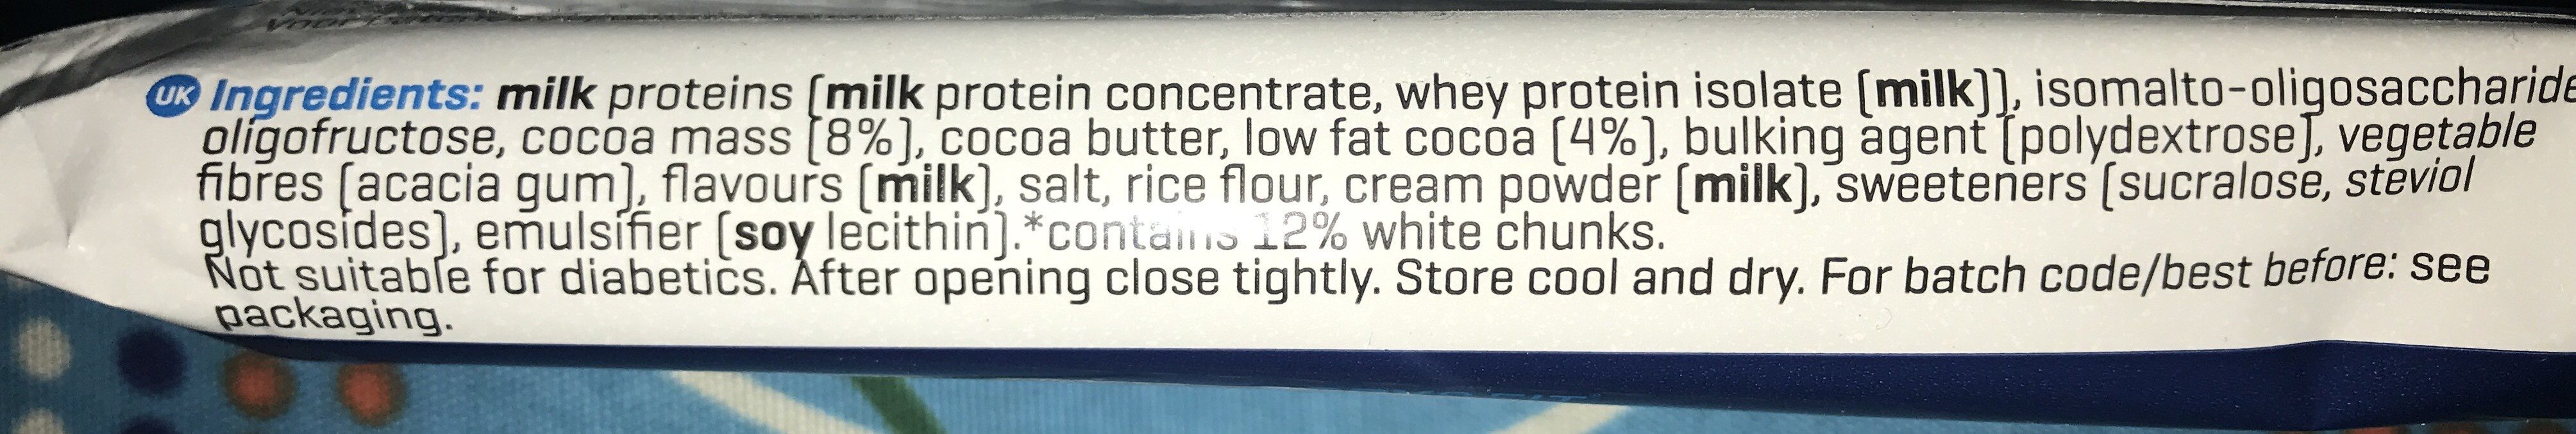 Clean Protein Bar, Chocolate & White Chunks - Ingredients - fr